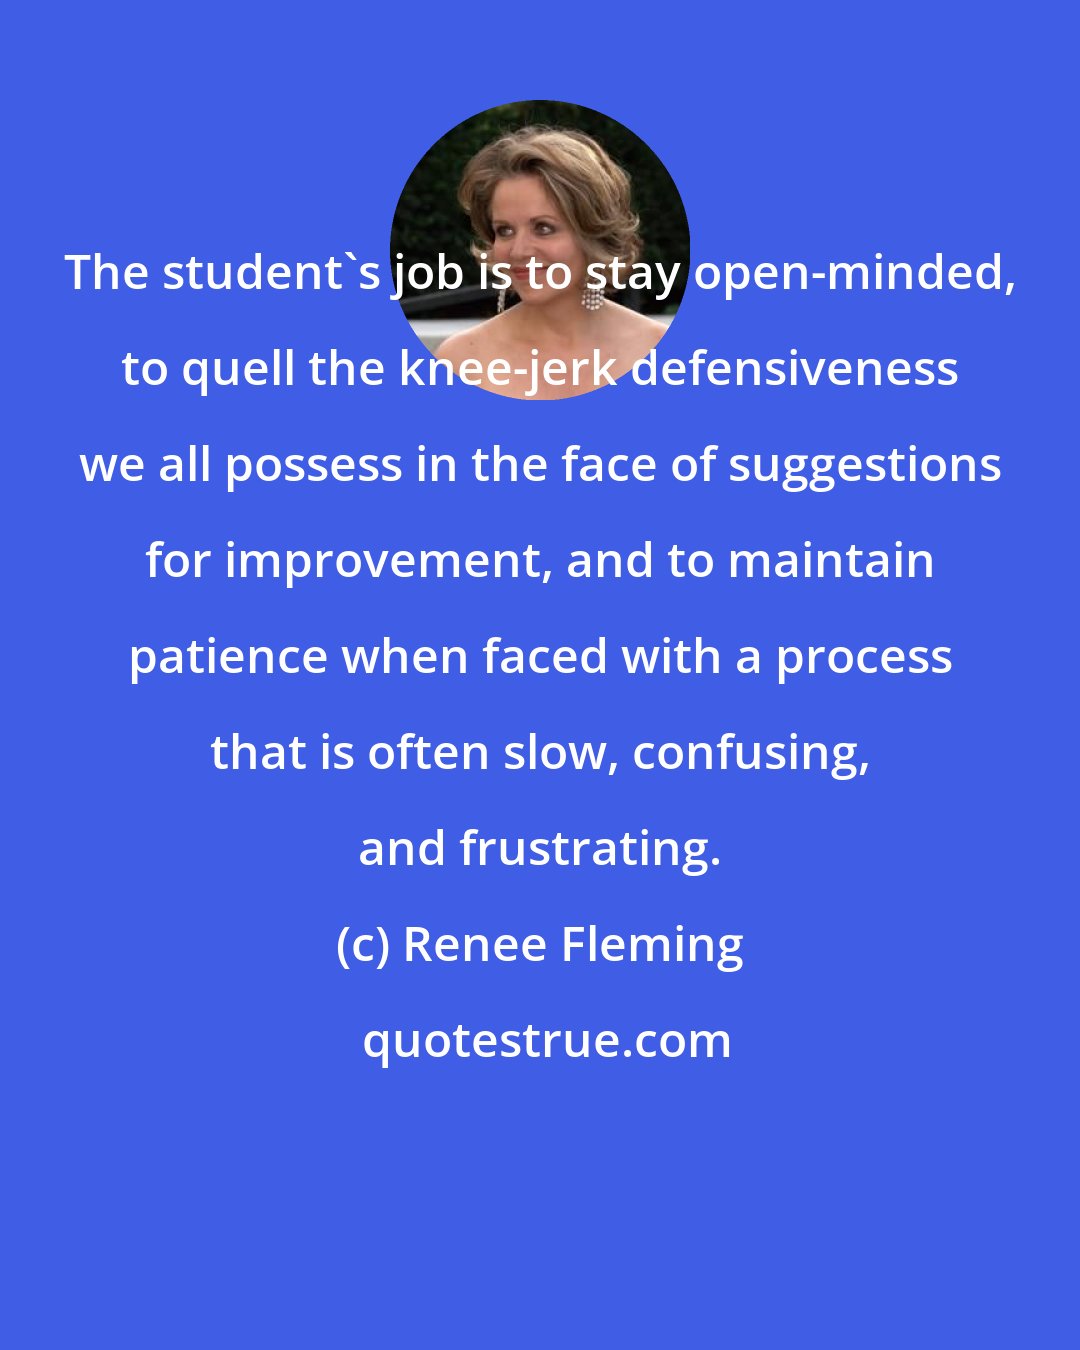 Renee Fleming: The student's job is to stay open-minded, to quell the knee-jerk defensiveness we all possess in the face of suggestions for improvement, and to maintain patience when faced with a process that is often slow, confusing, and frustrating.